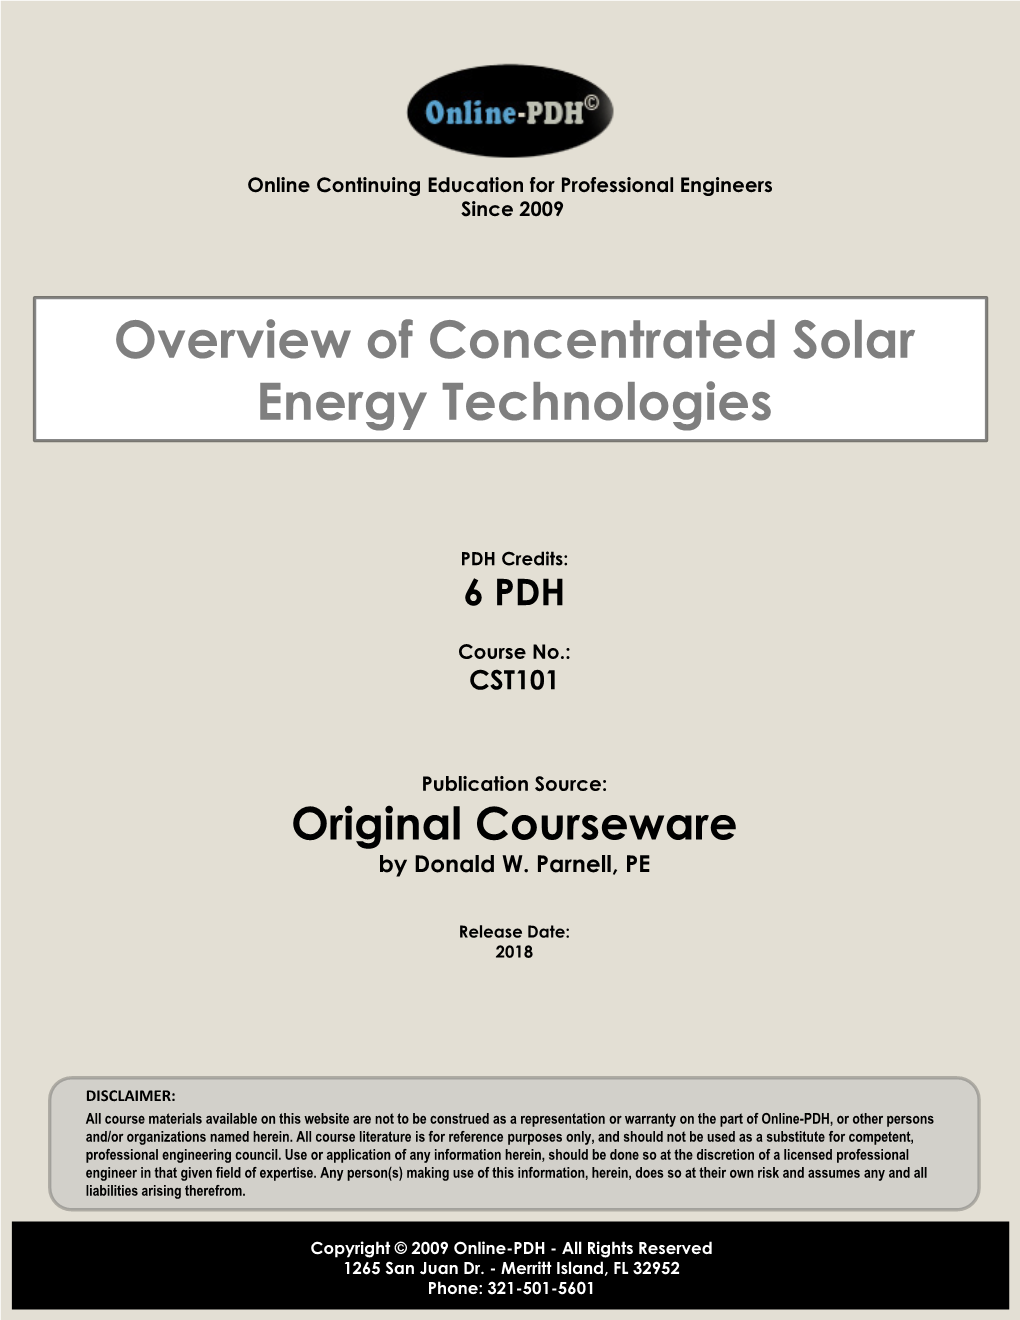 Overview of Concentrated Solar Energy Technologies